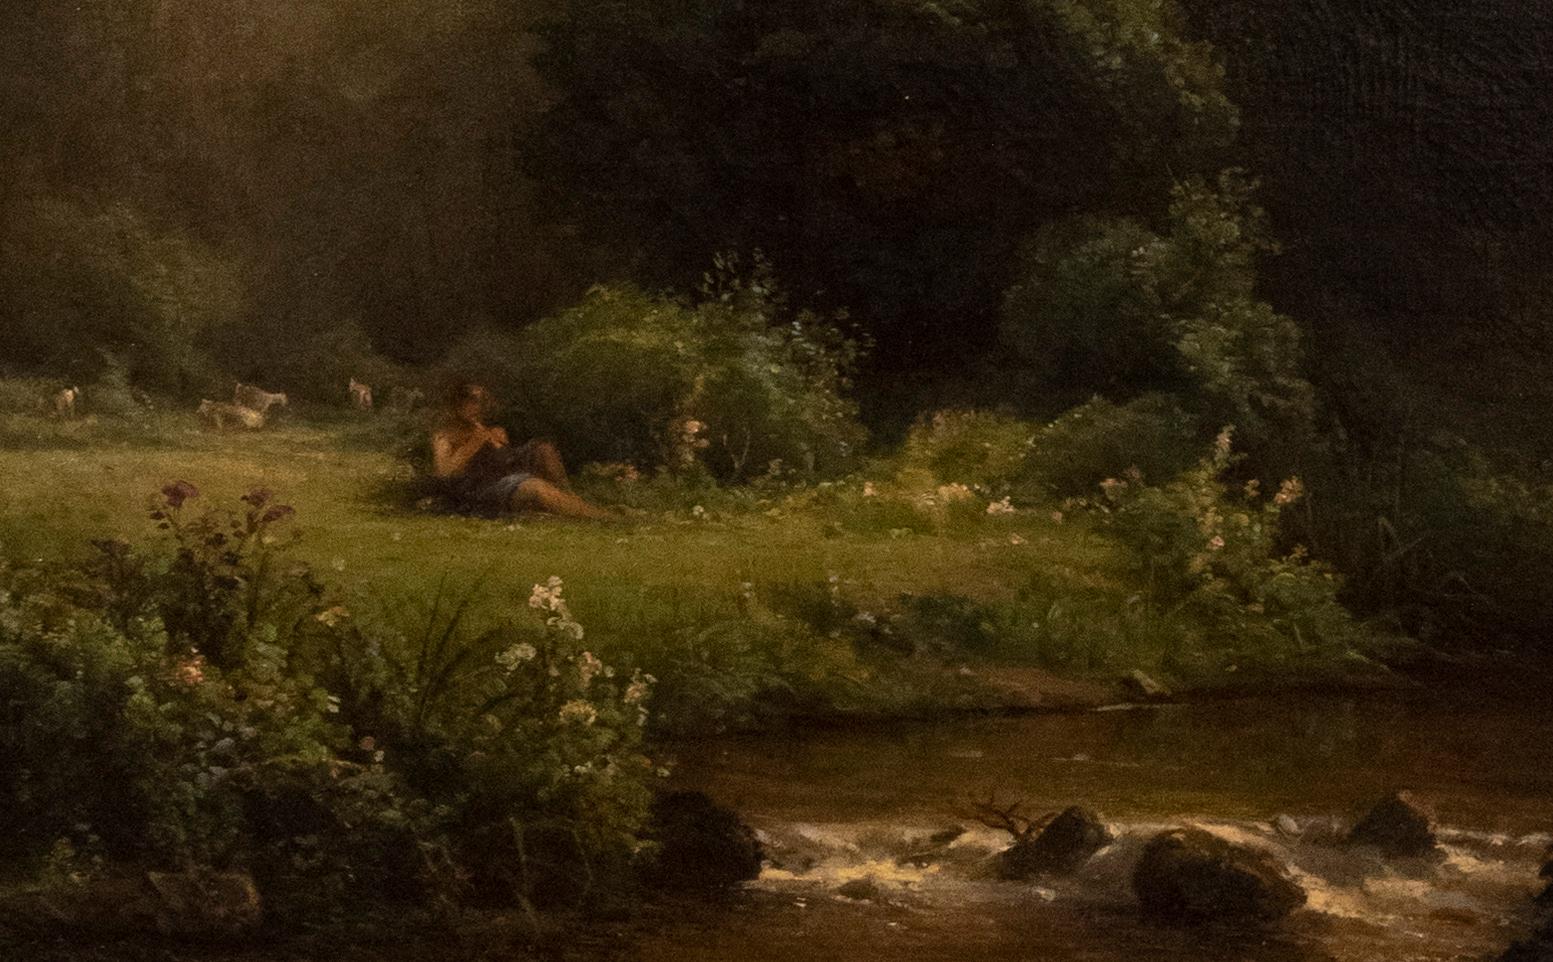 Shepherd by the River  - Romantic Painting by Louis Aimé Japy